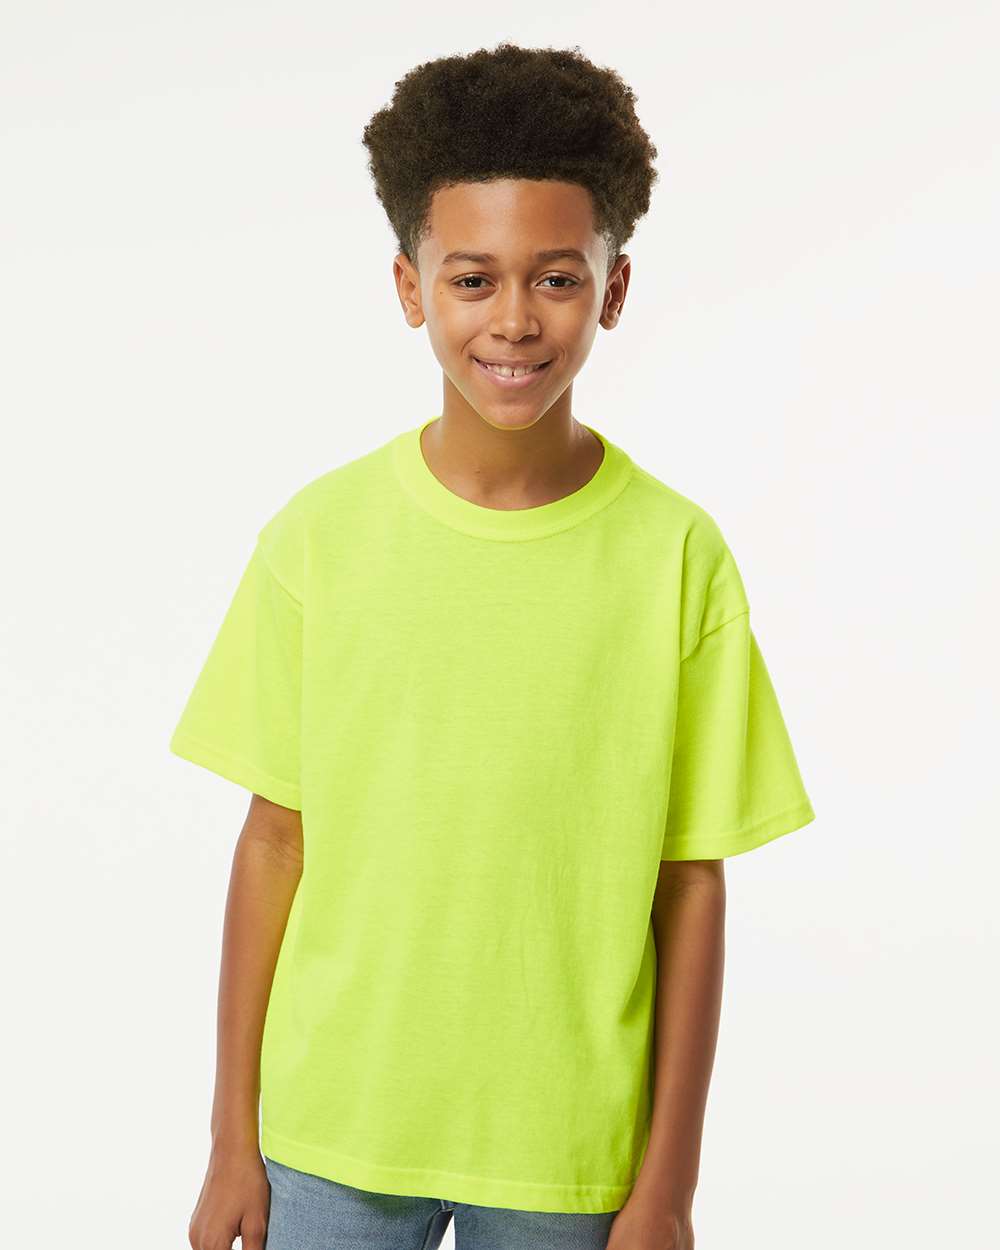 M&O Youth Gold Soft Touch T-Shirt 4850 #colormdl_Safety Green